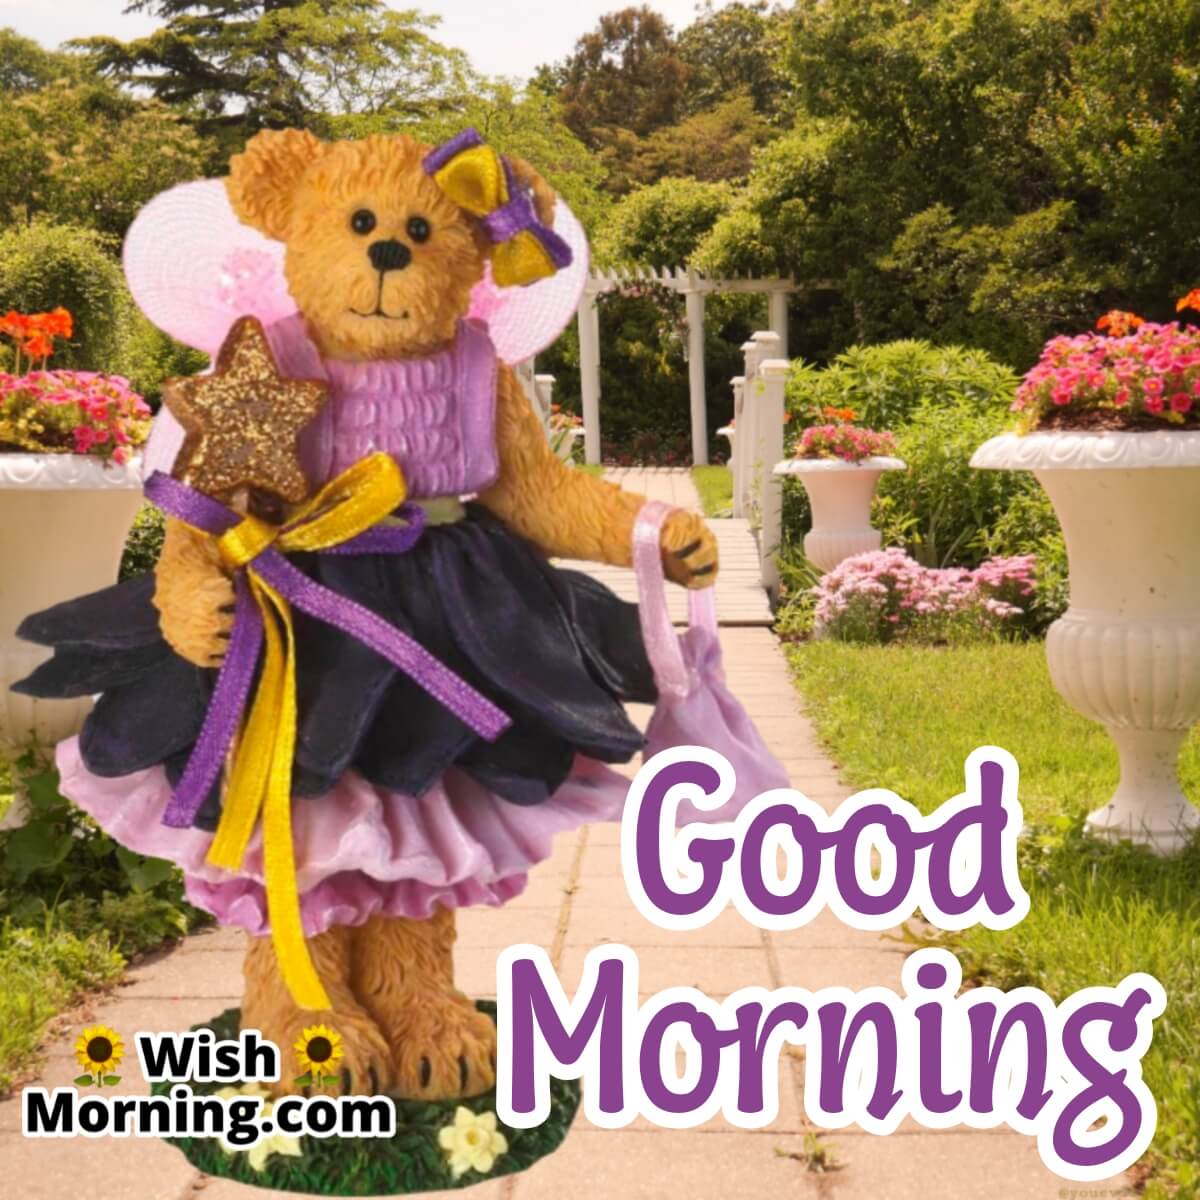 Good Morning Teddy Images